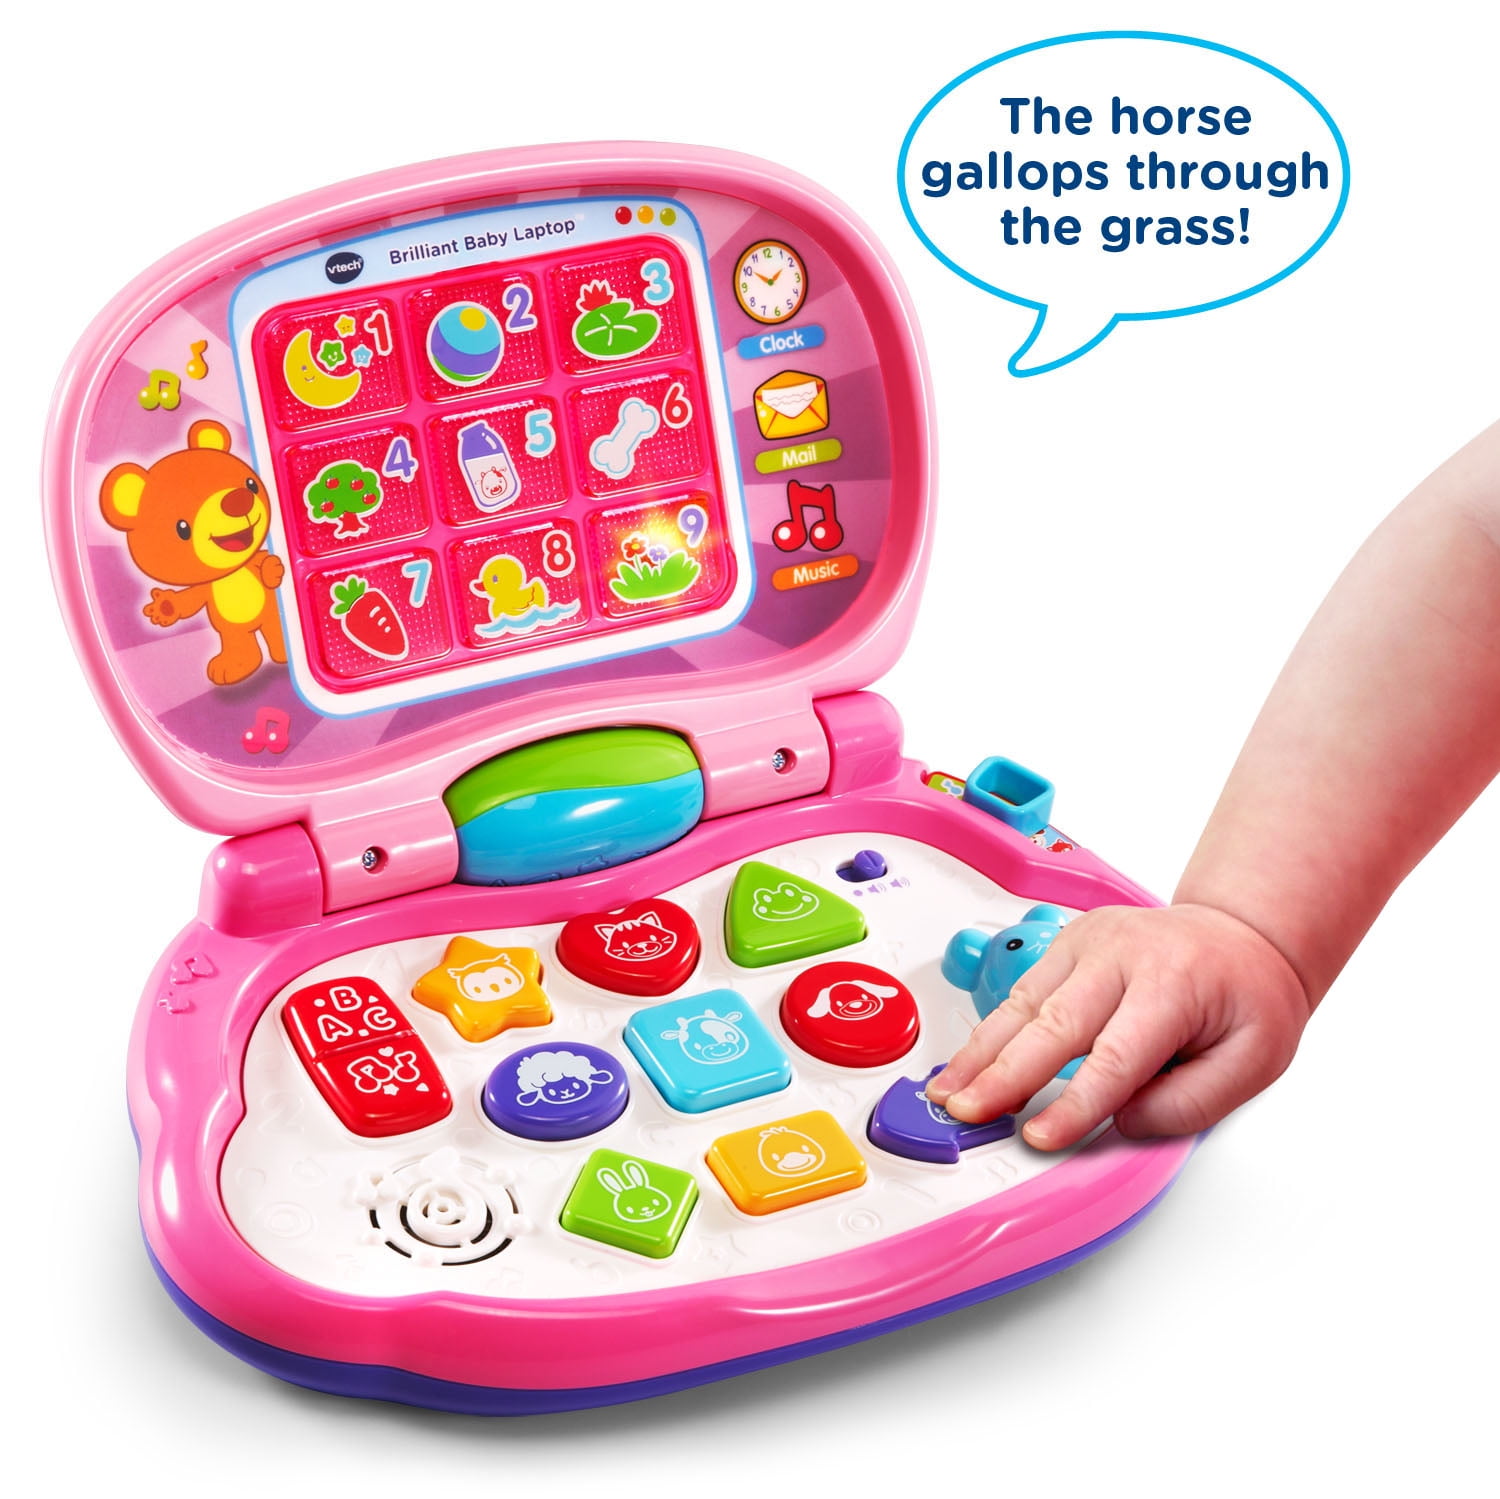 Vtech My Laptop Pink available at  in lowest price with free  delivery all over Pakistan